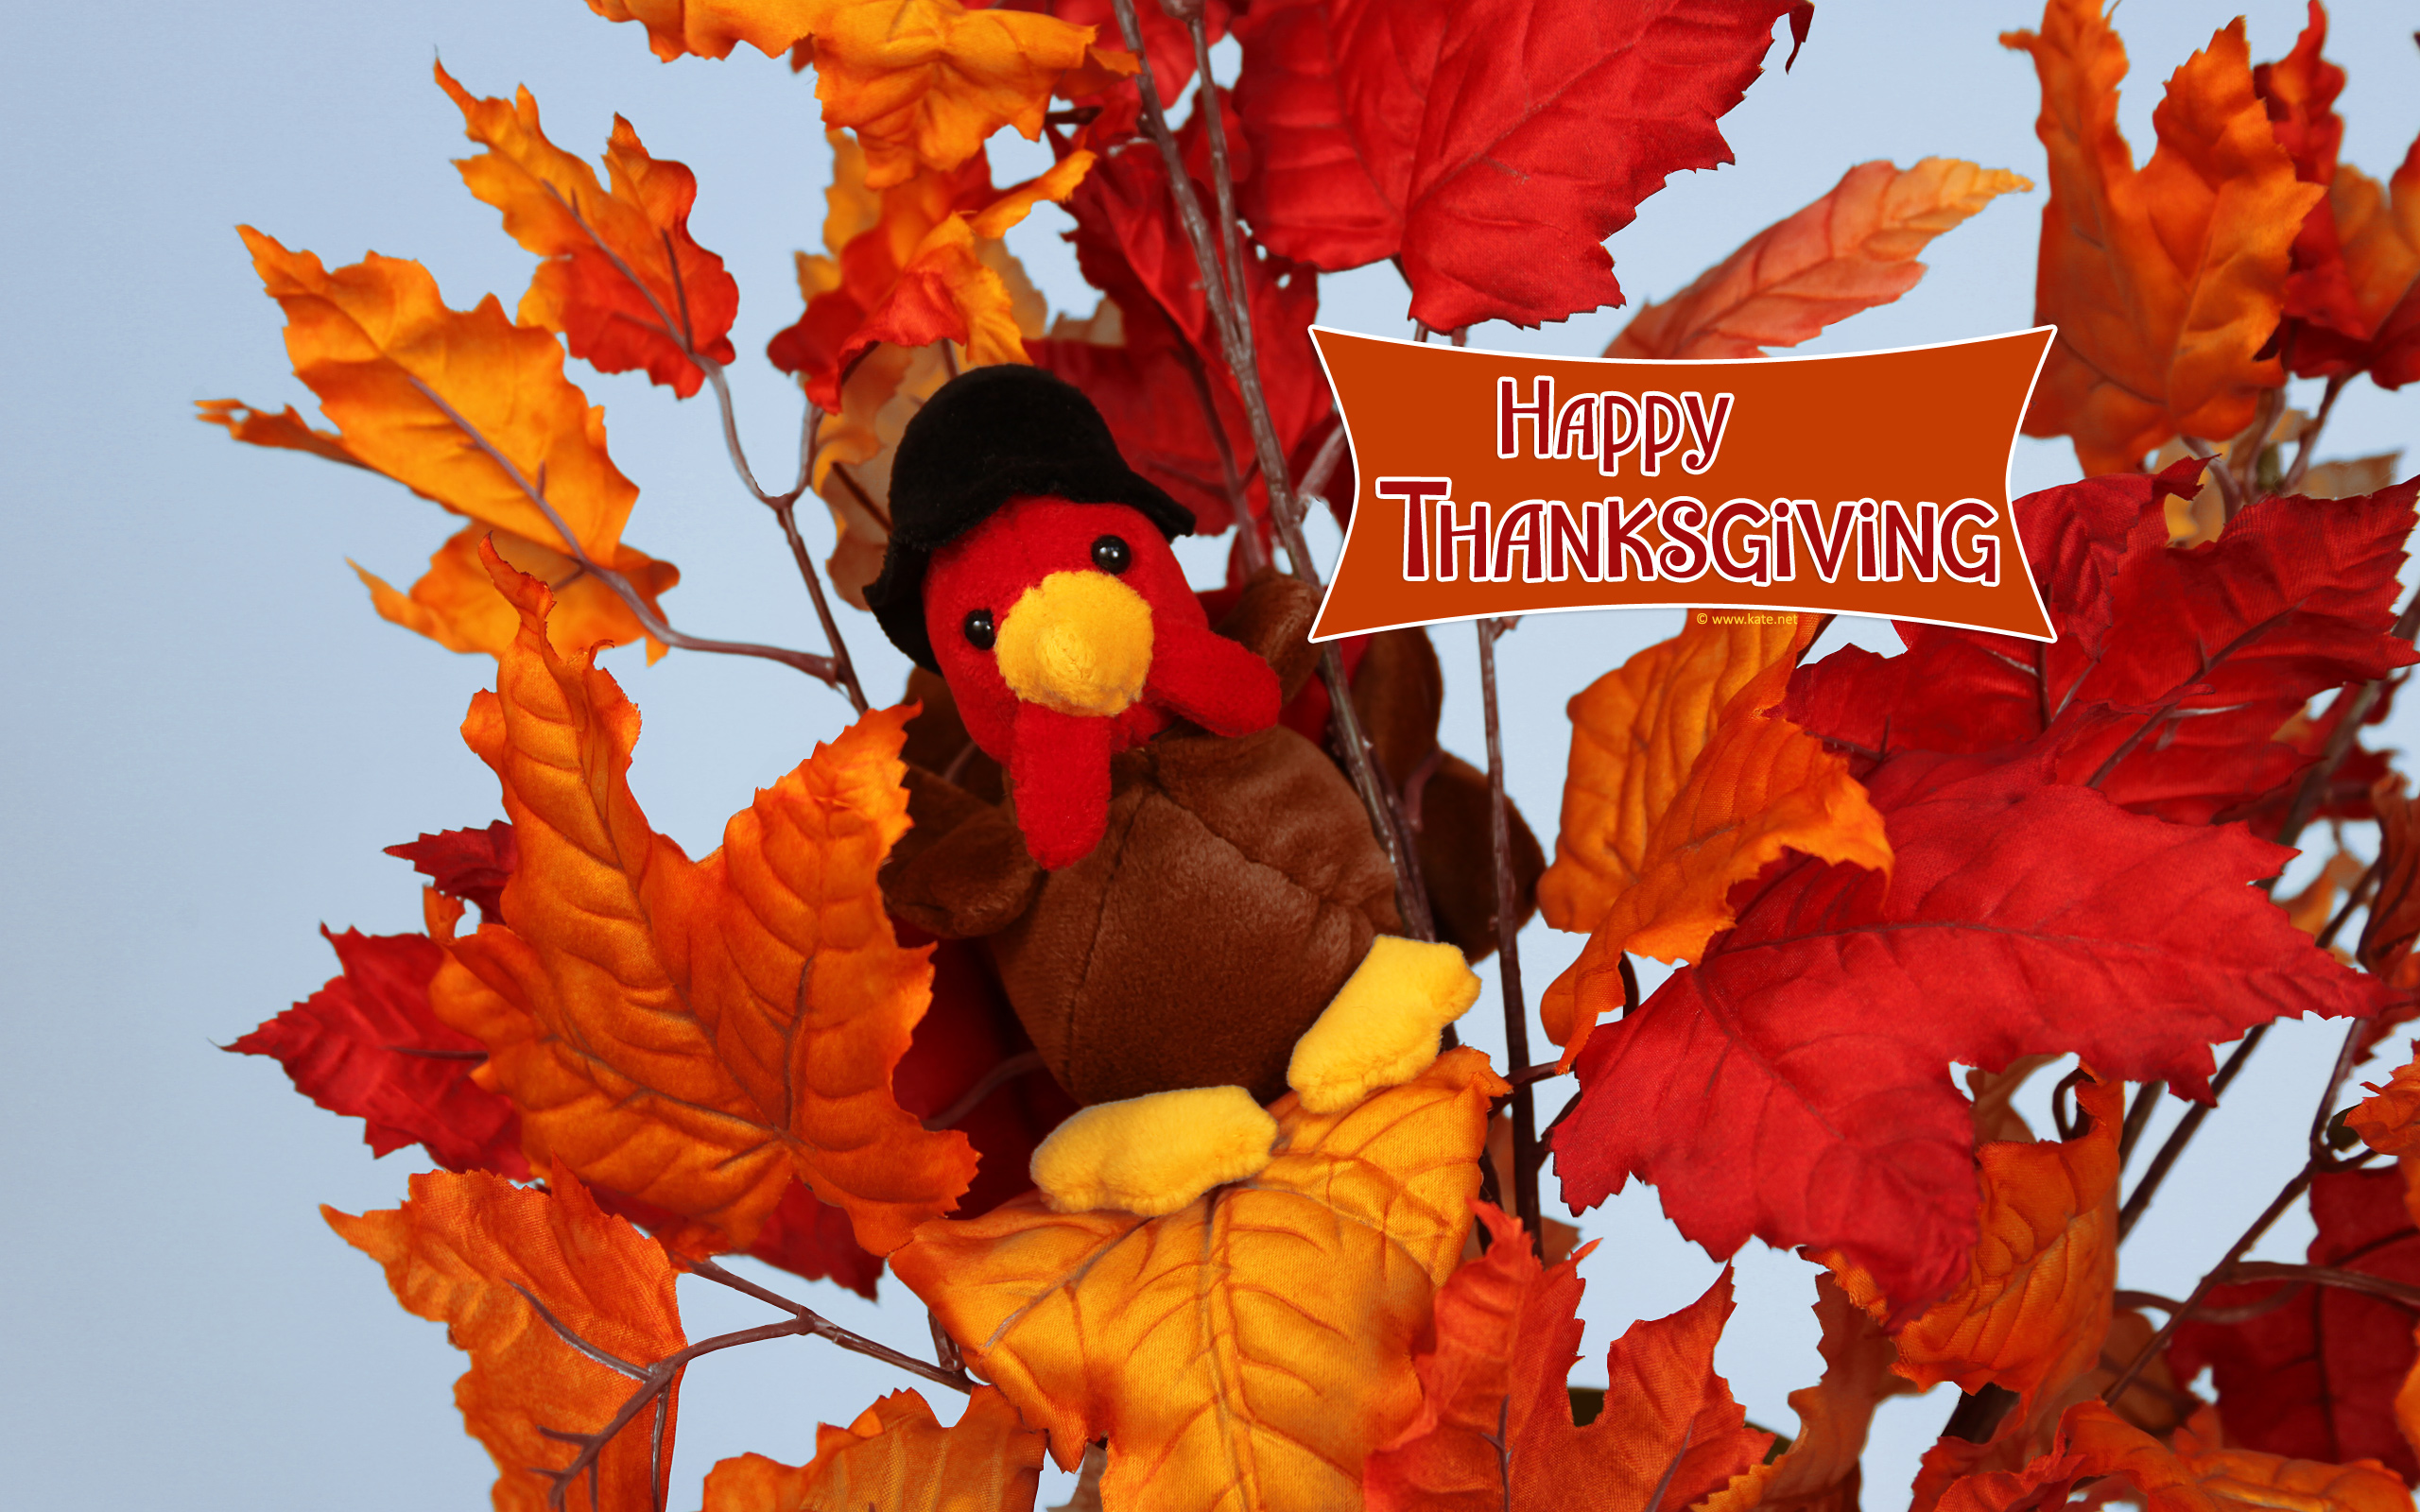 Holiday With Original Thanksgiving Wallpaper Designed By Kate